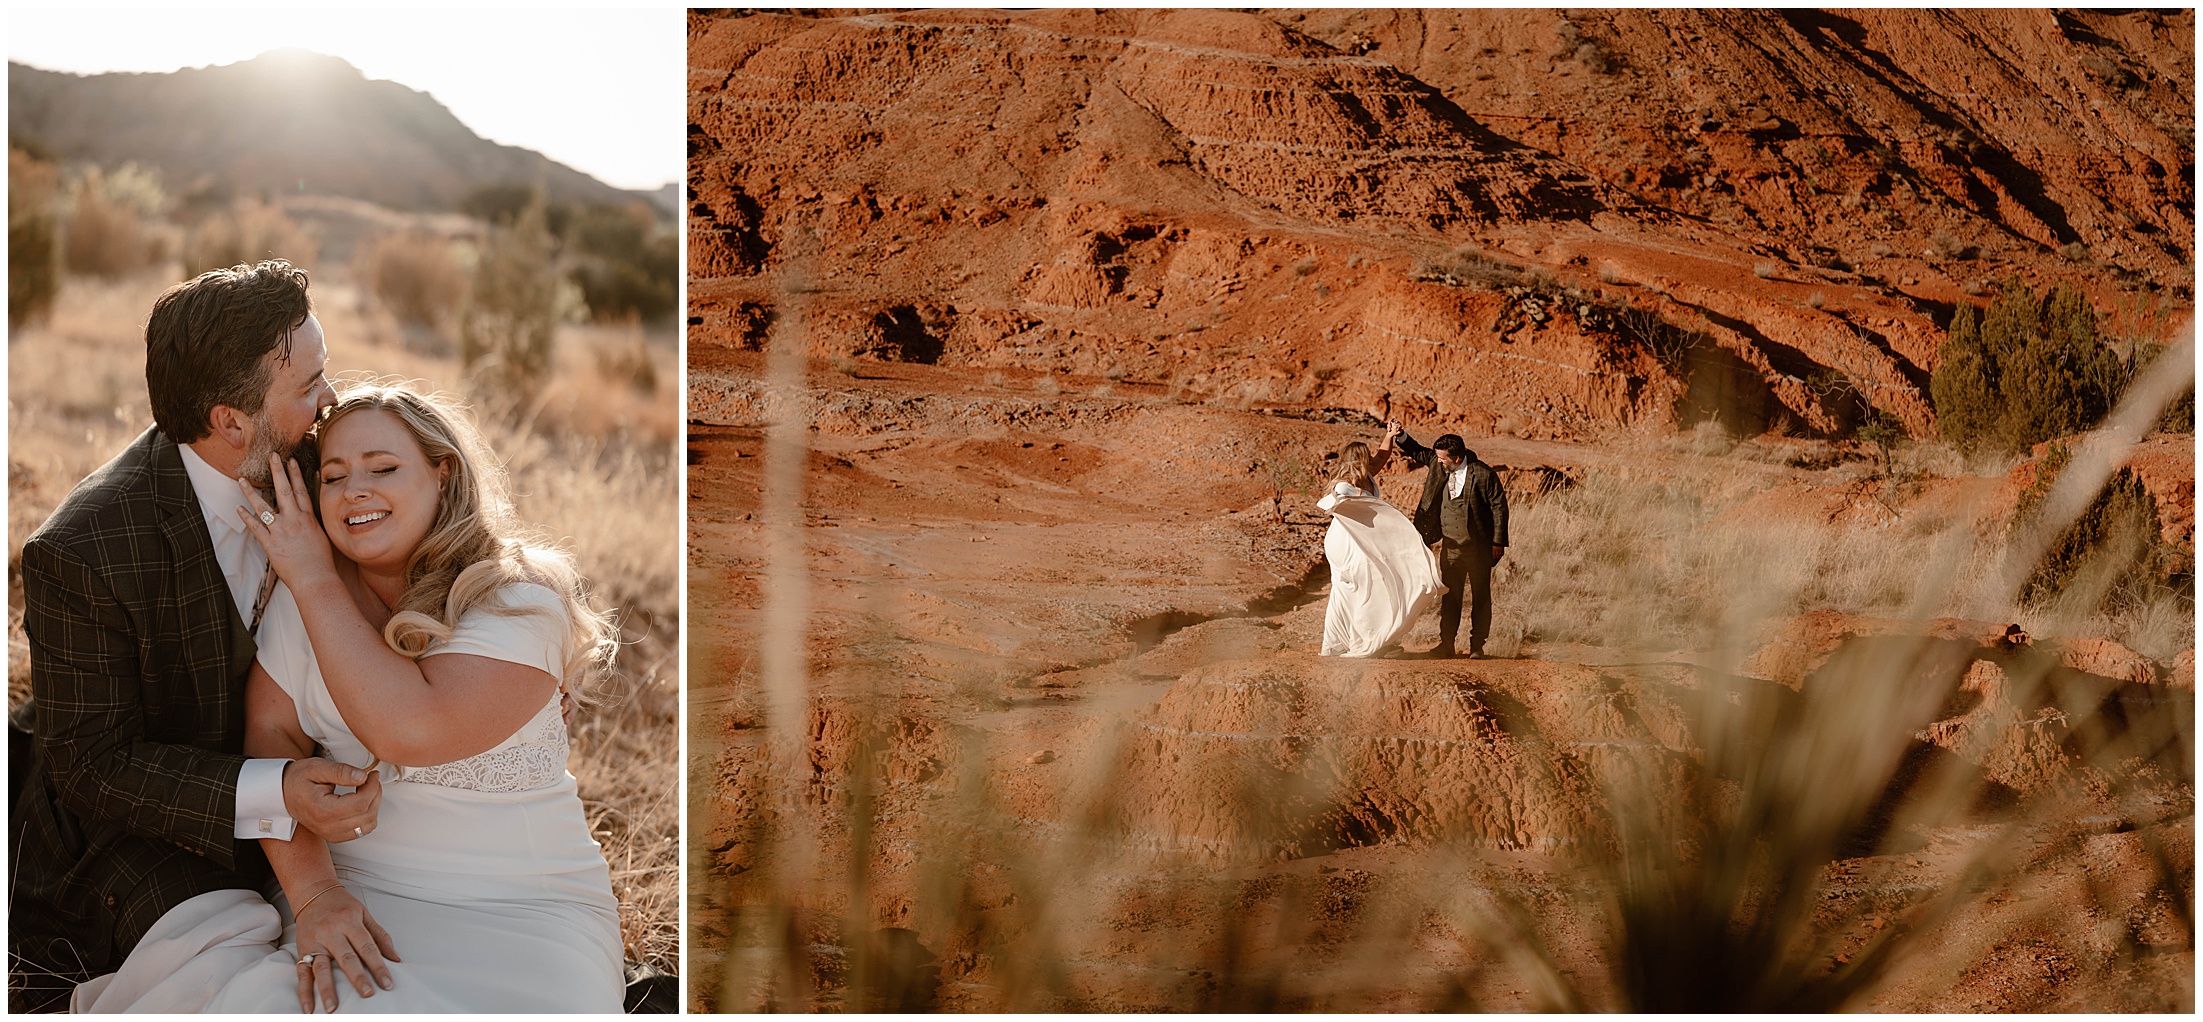 Palo Duro Canyon weddings, Palo Duro Canyon elopements, Texas wedding packages, Texas elopement packages, Unique Palo Duro Canyon venues, Scenic wedding locations in Palo Duro Canyon 